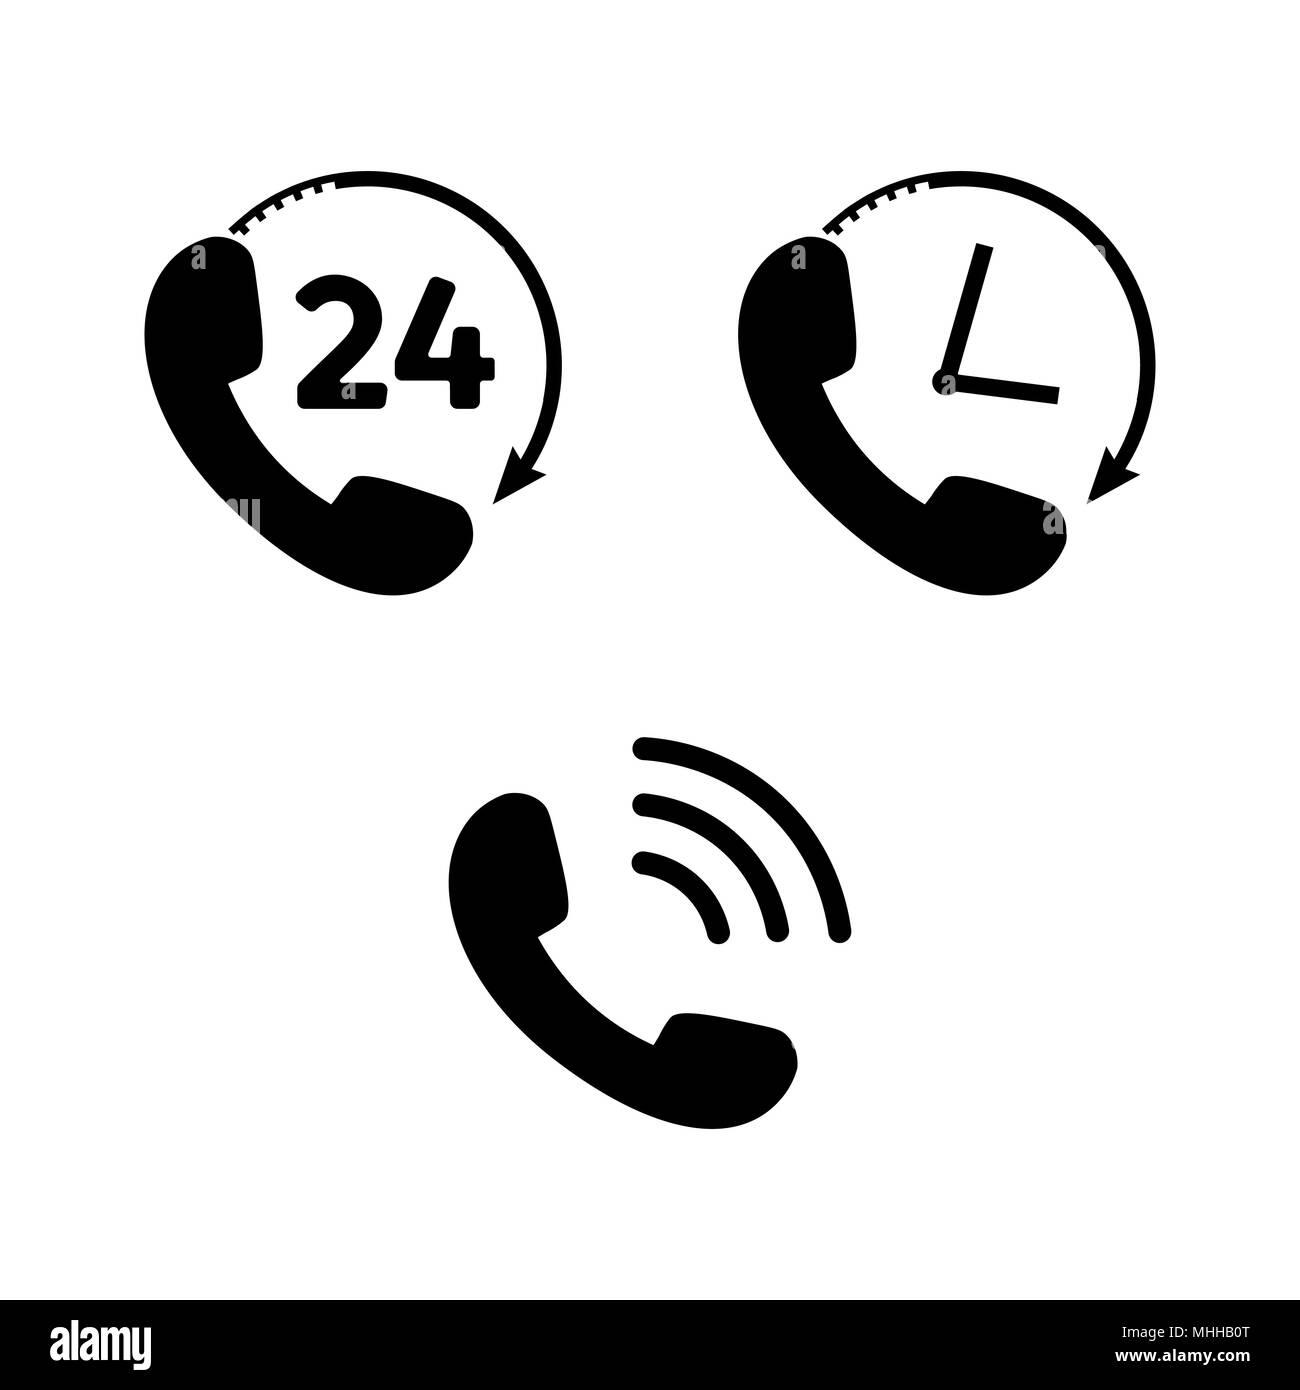 Phone Icon set in flat style. Telephone symbols isolated on white background. Handset icon for logo or app. Support, hotline signs. Phone 24 hour, pho Stock Vector